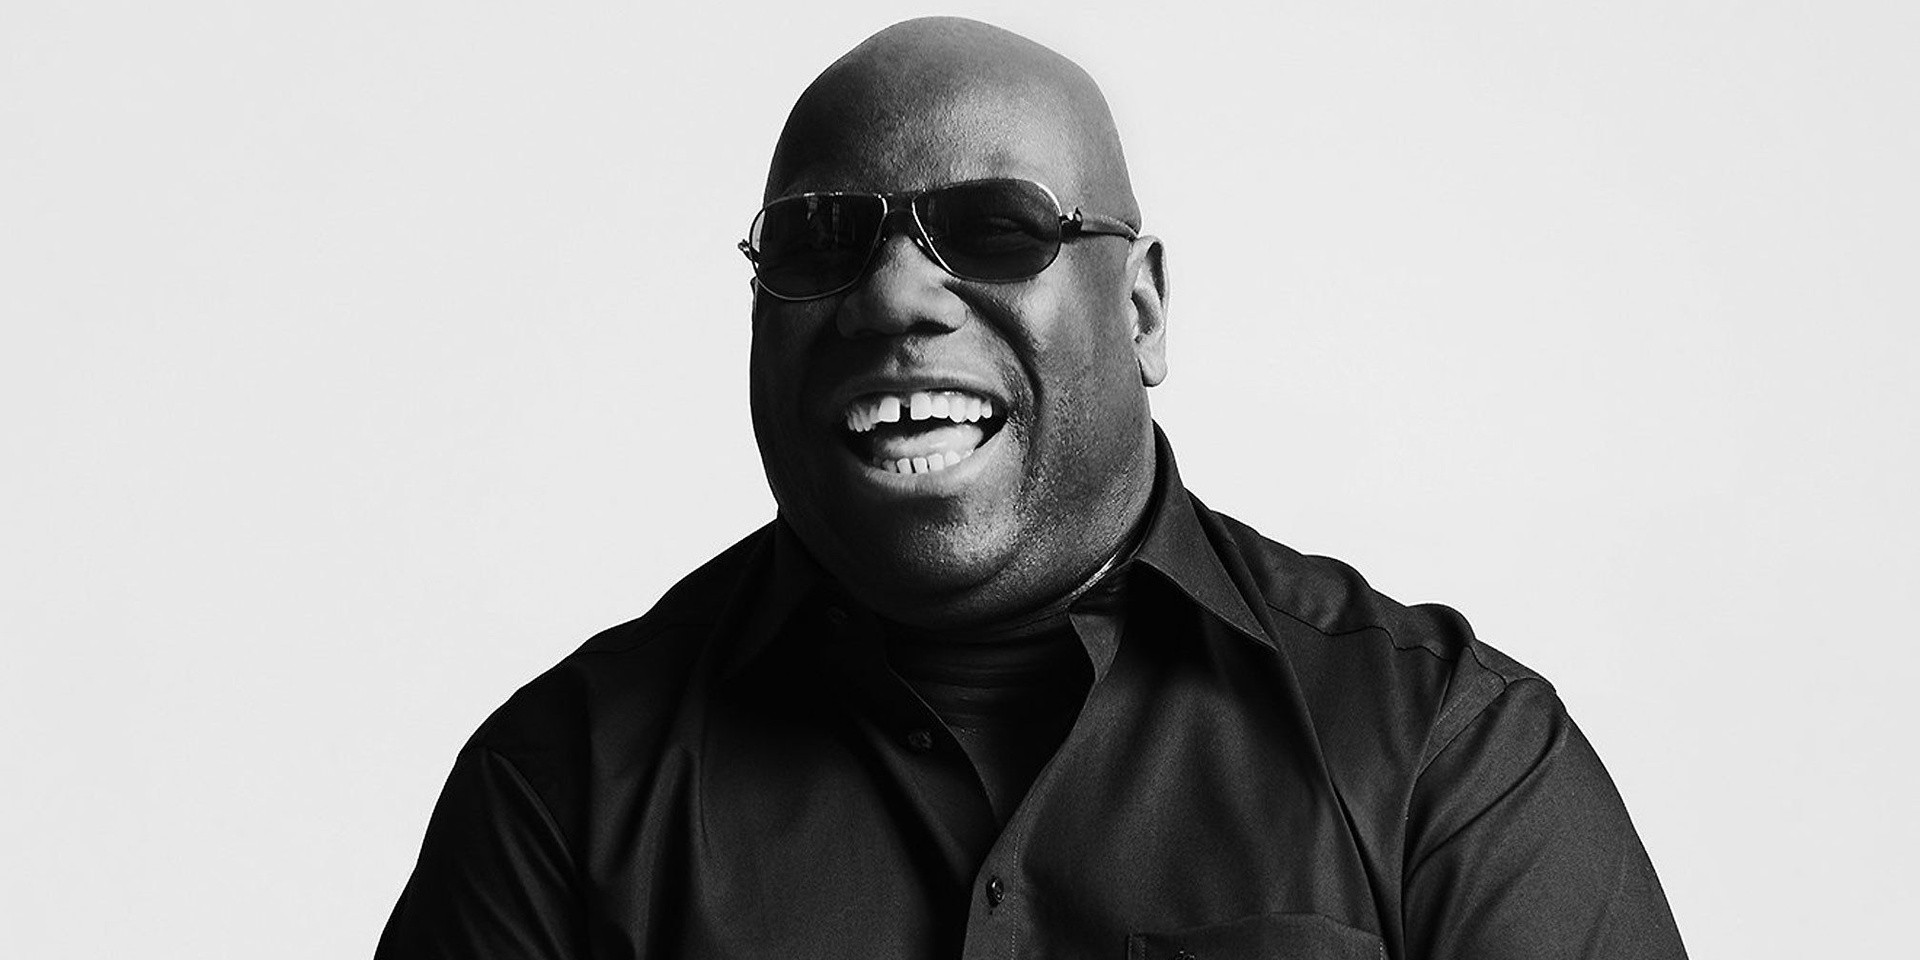 House and techno legend Carl Cox to perform at Marquee Singapore this May 